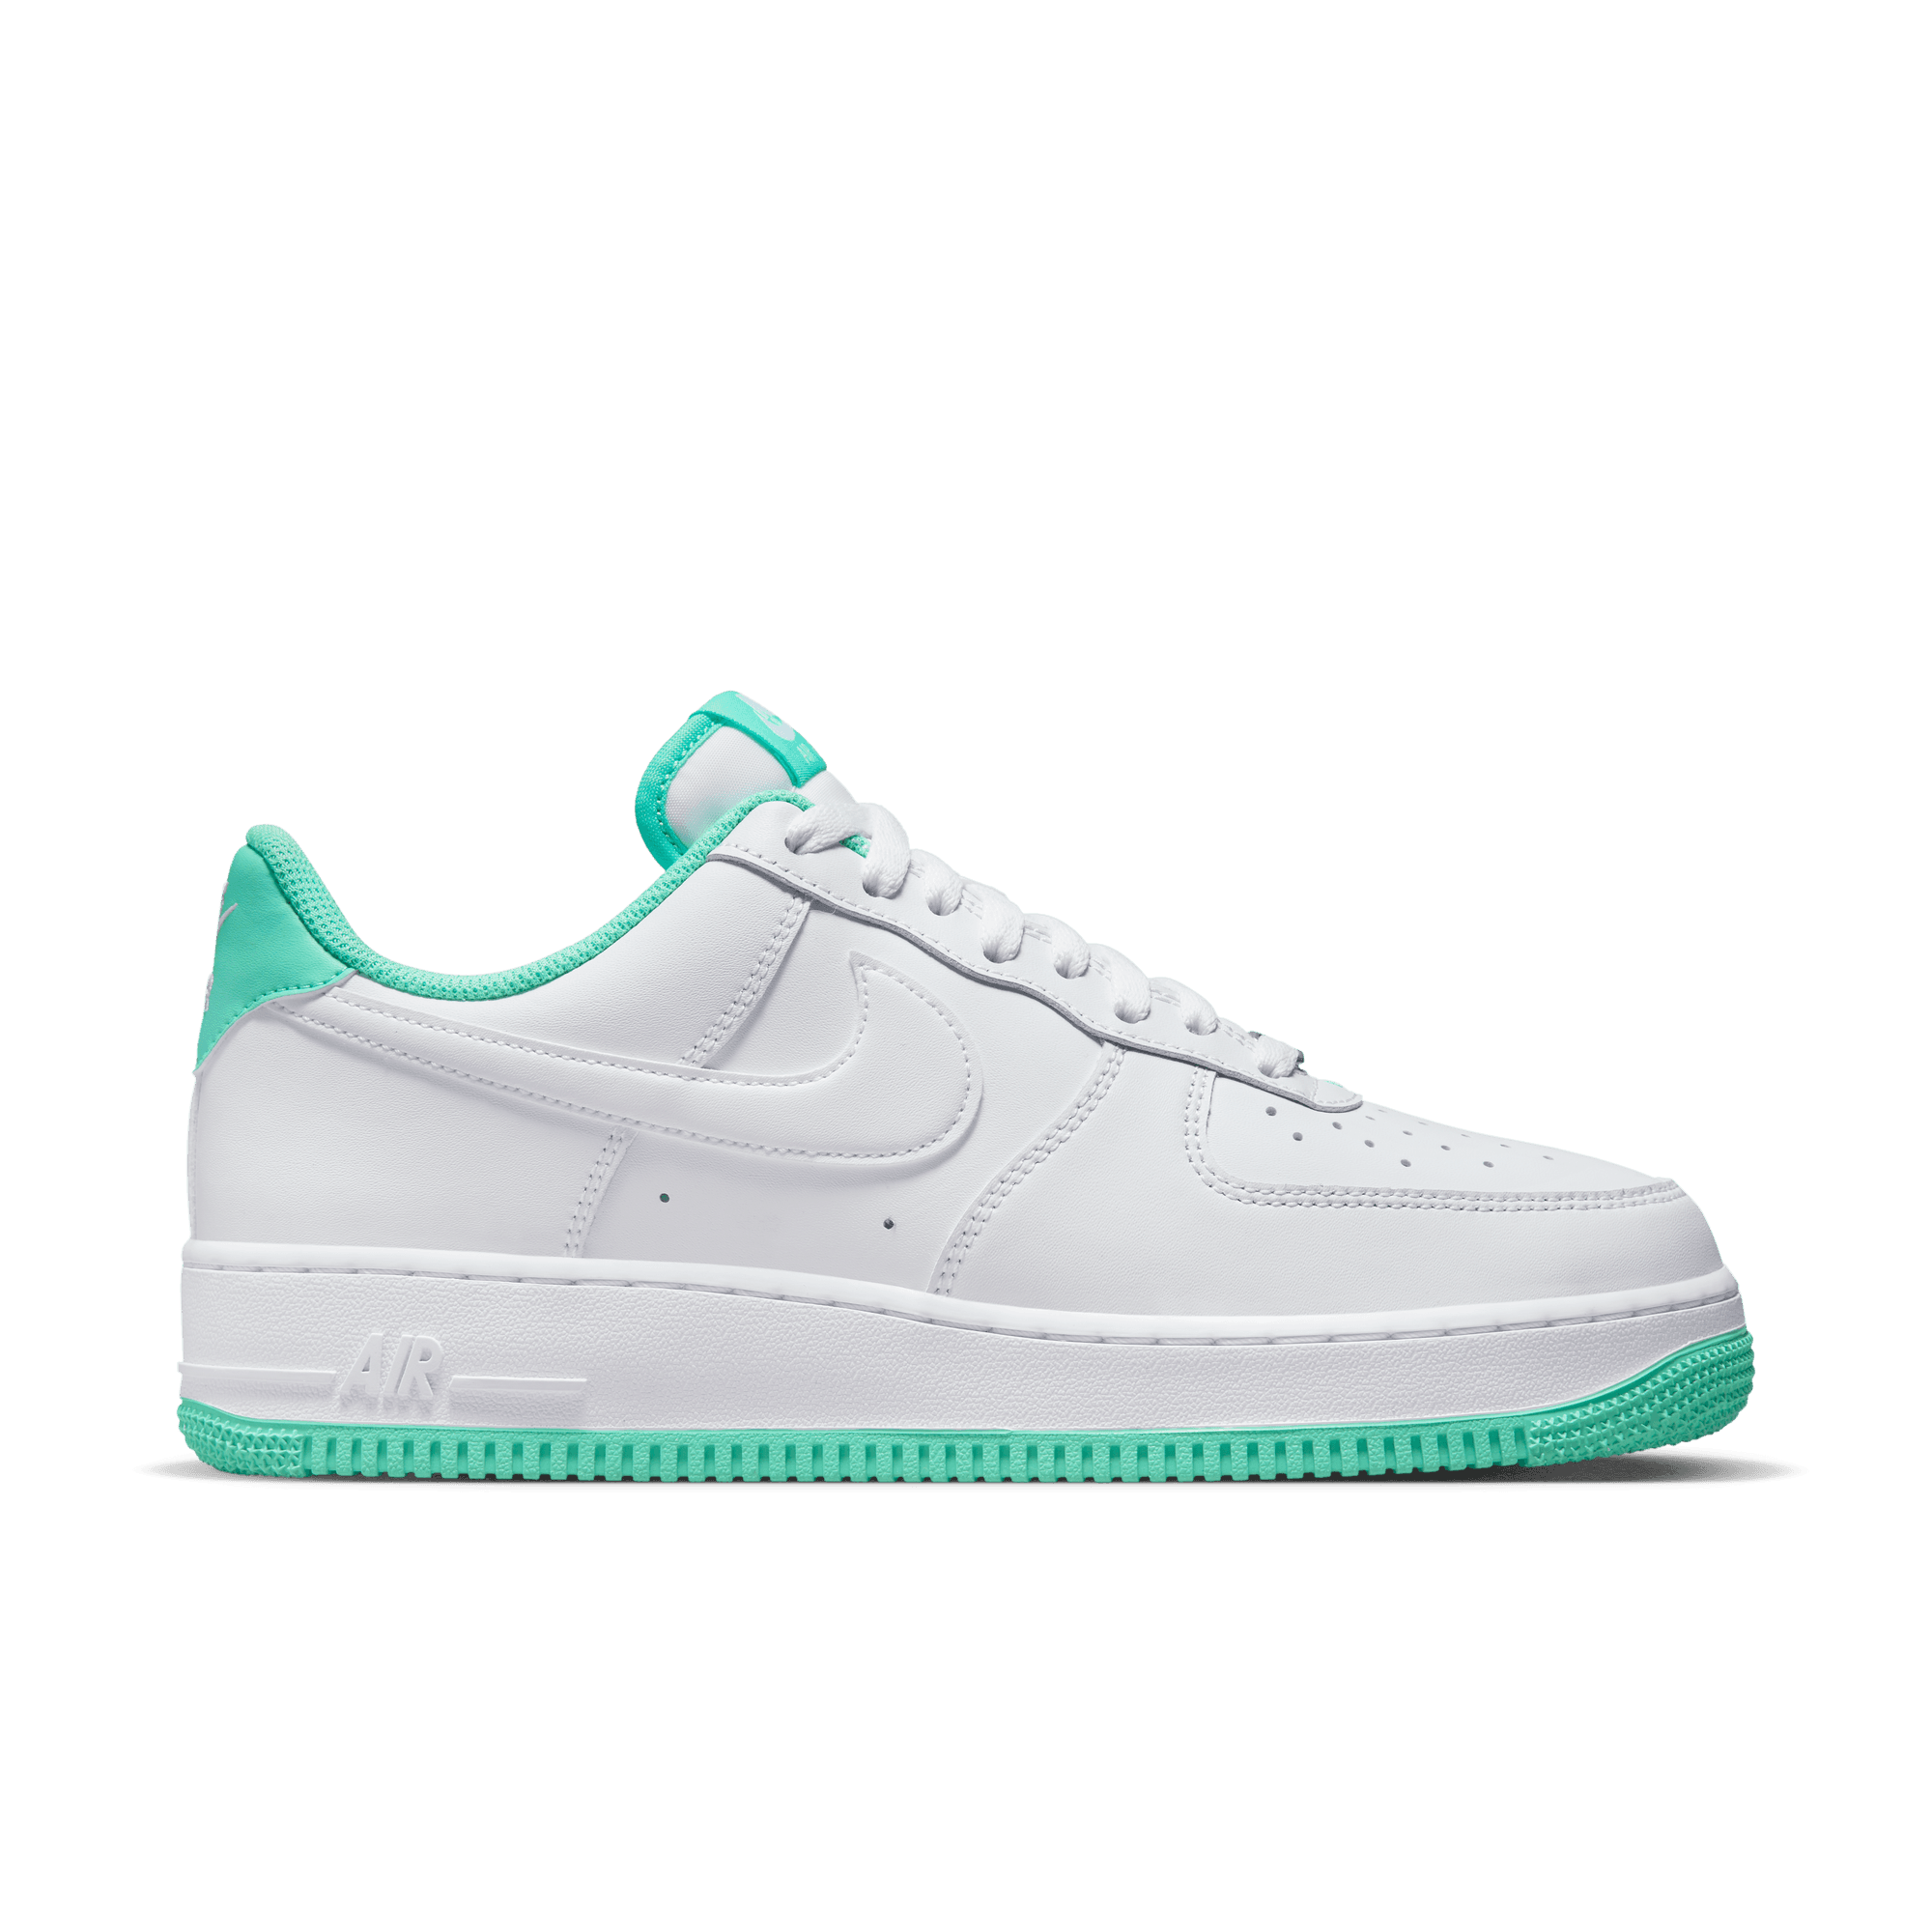 Nike Air Force 1 '07 LV8 1 Shoes - Men's - GBNY